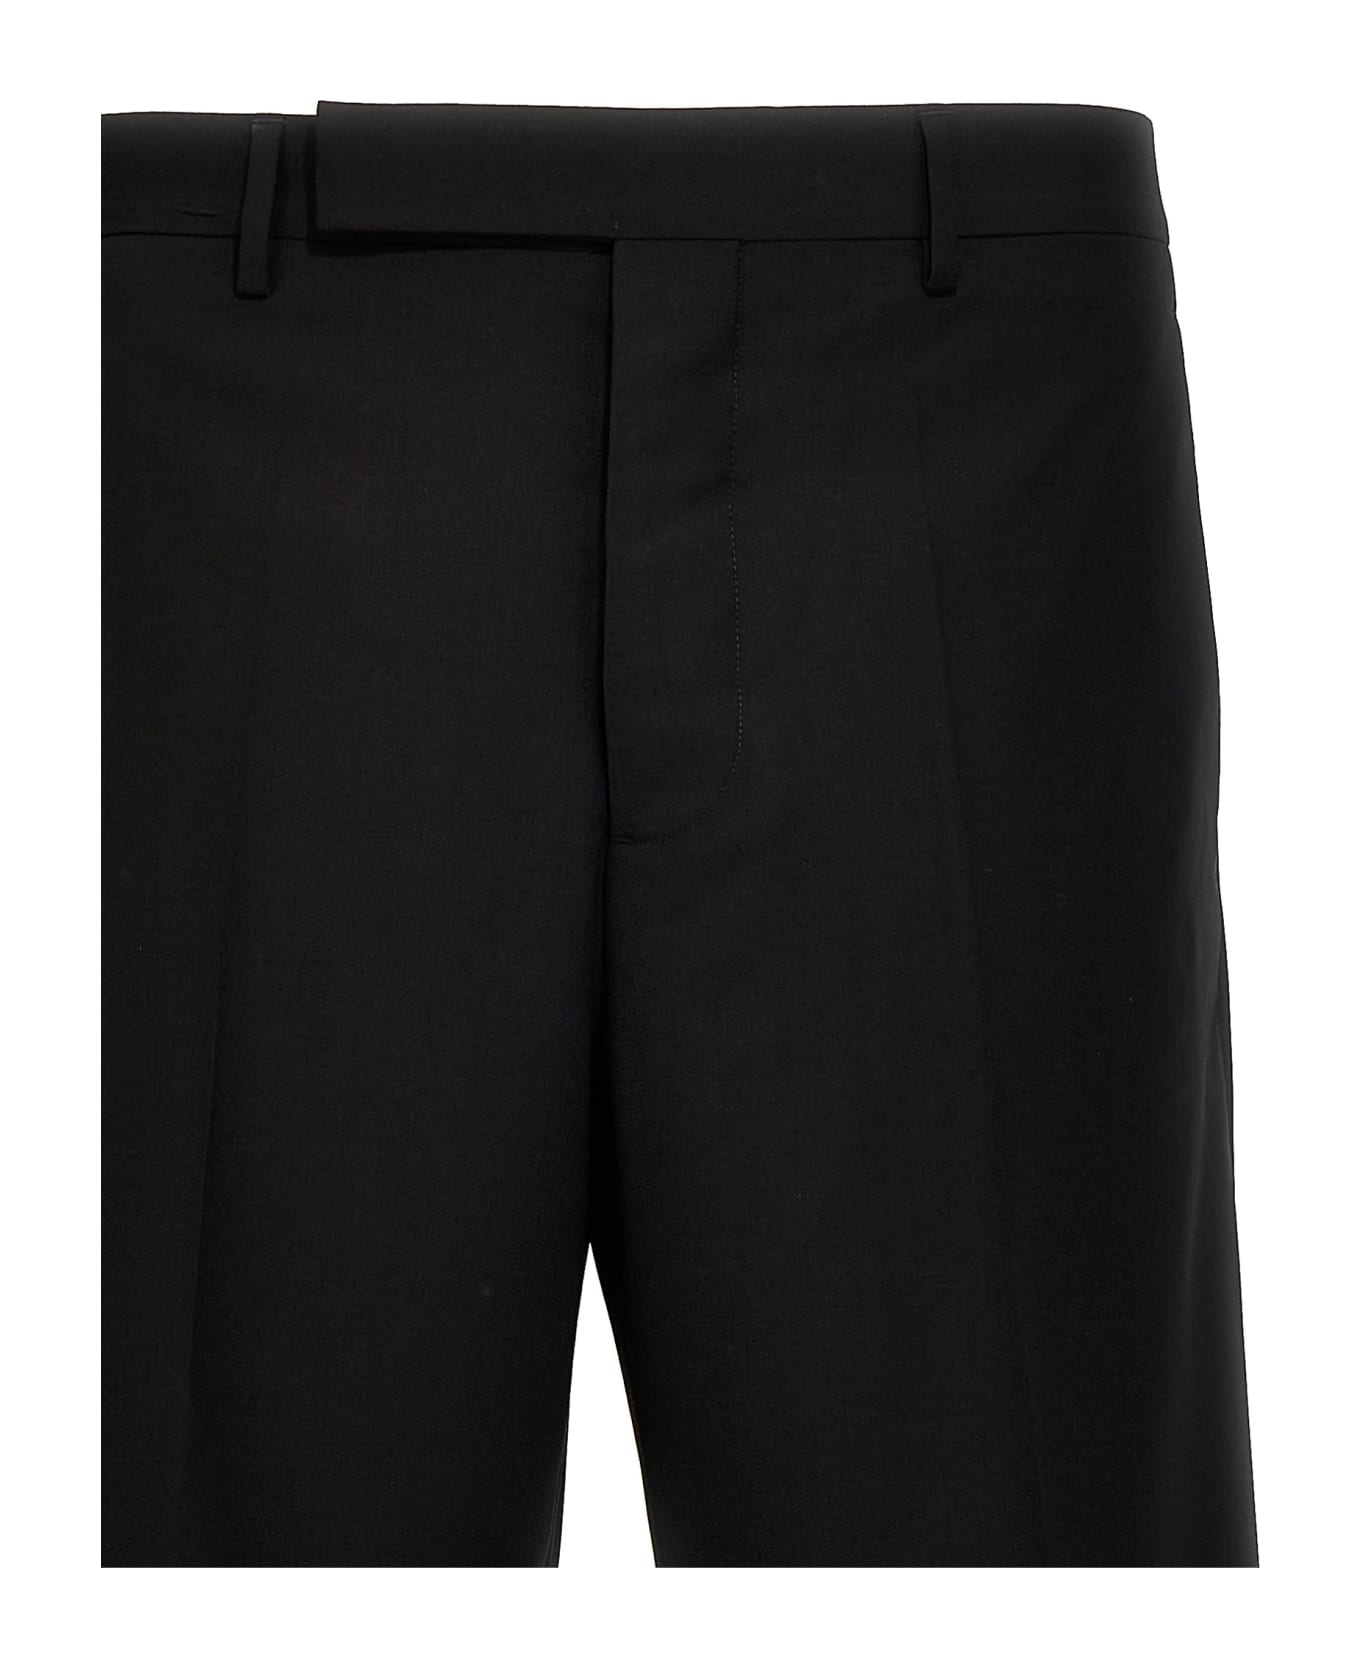 Rick Owens 'tailored Dietrich' Pants - BLACK ボトムス